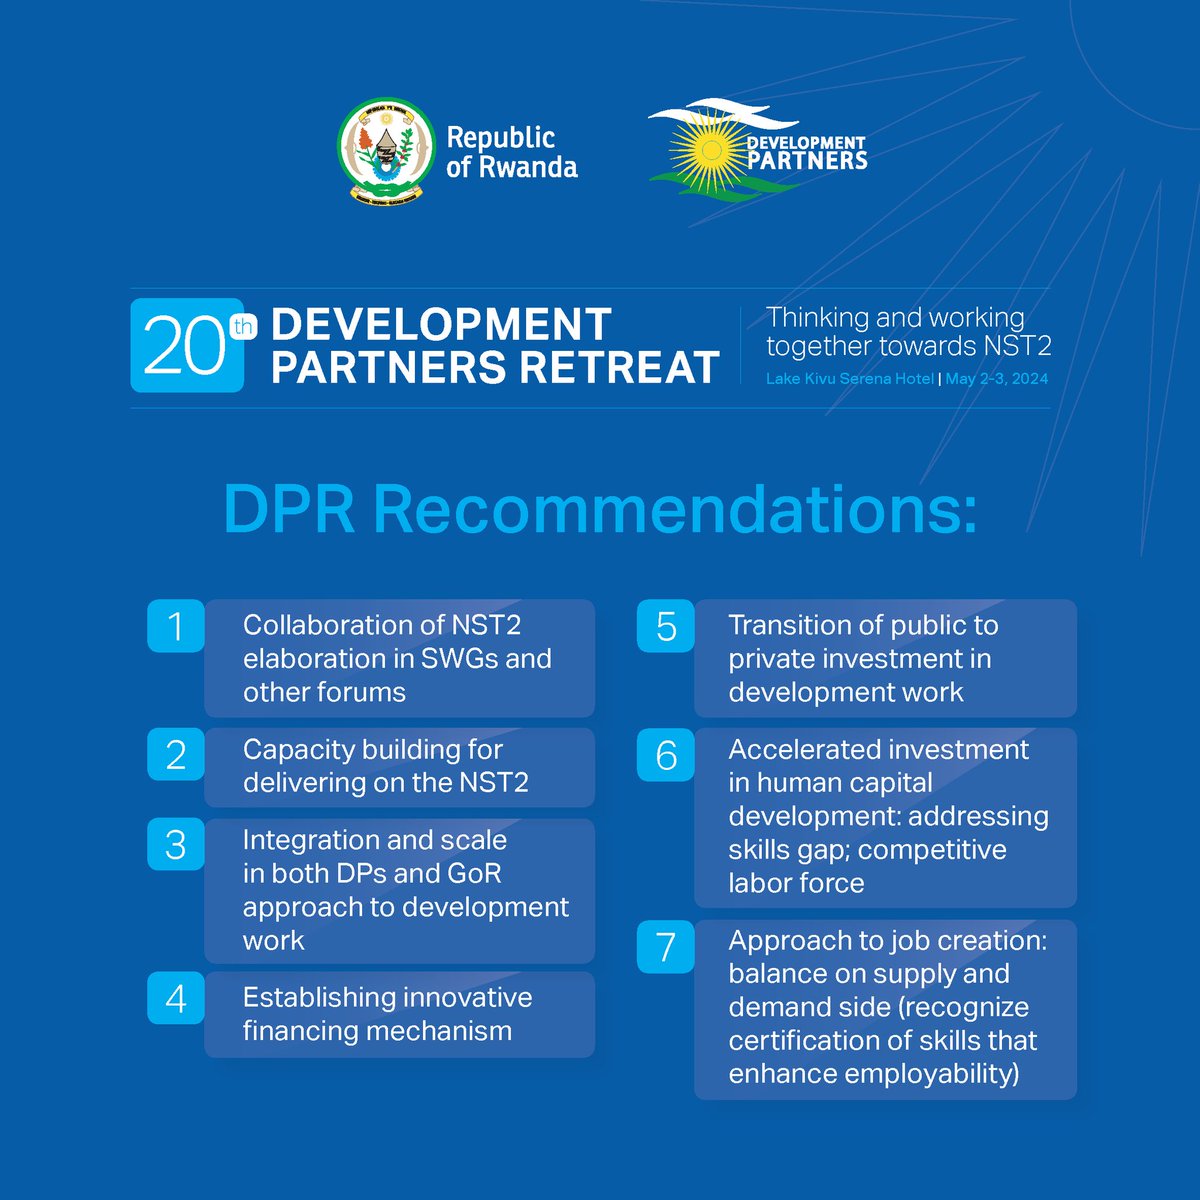 #DPR2024 concludes on a high note, as Development Partners commit to work tirelessly deliver #NST2.